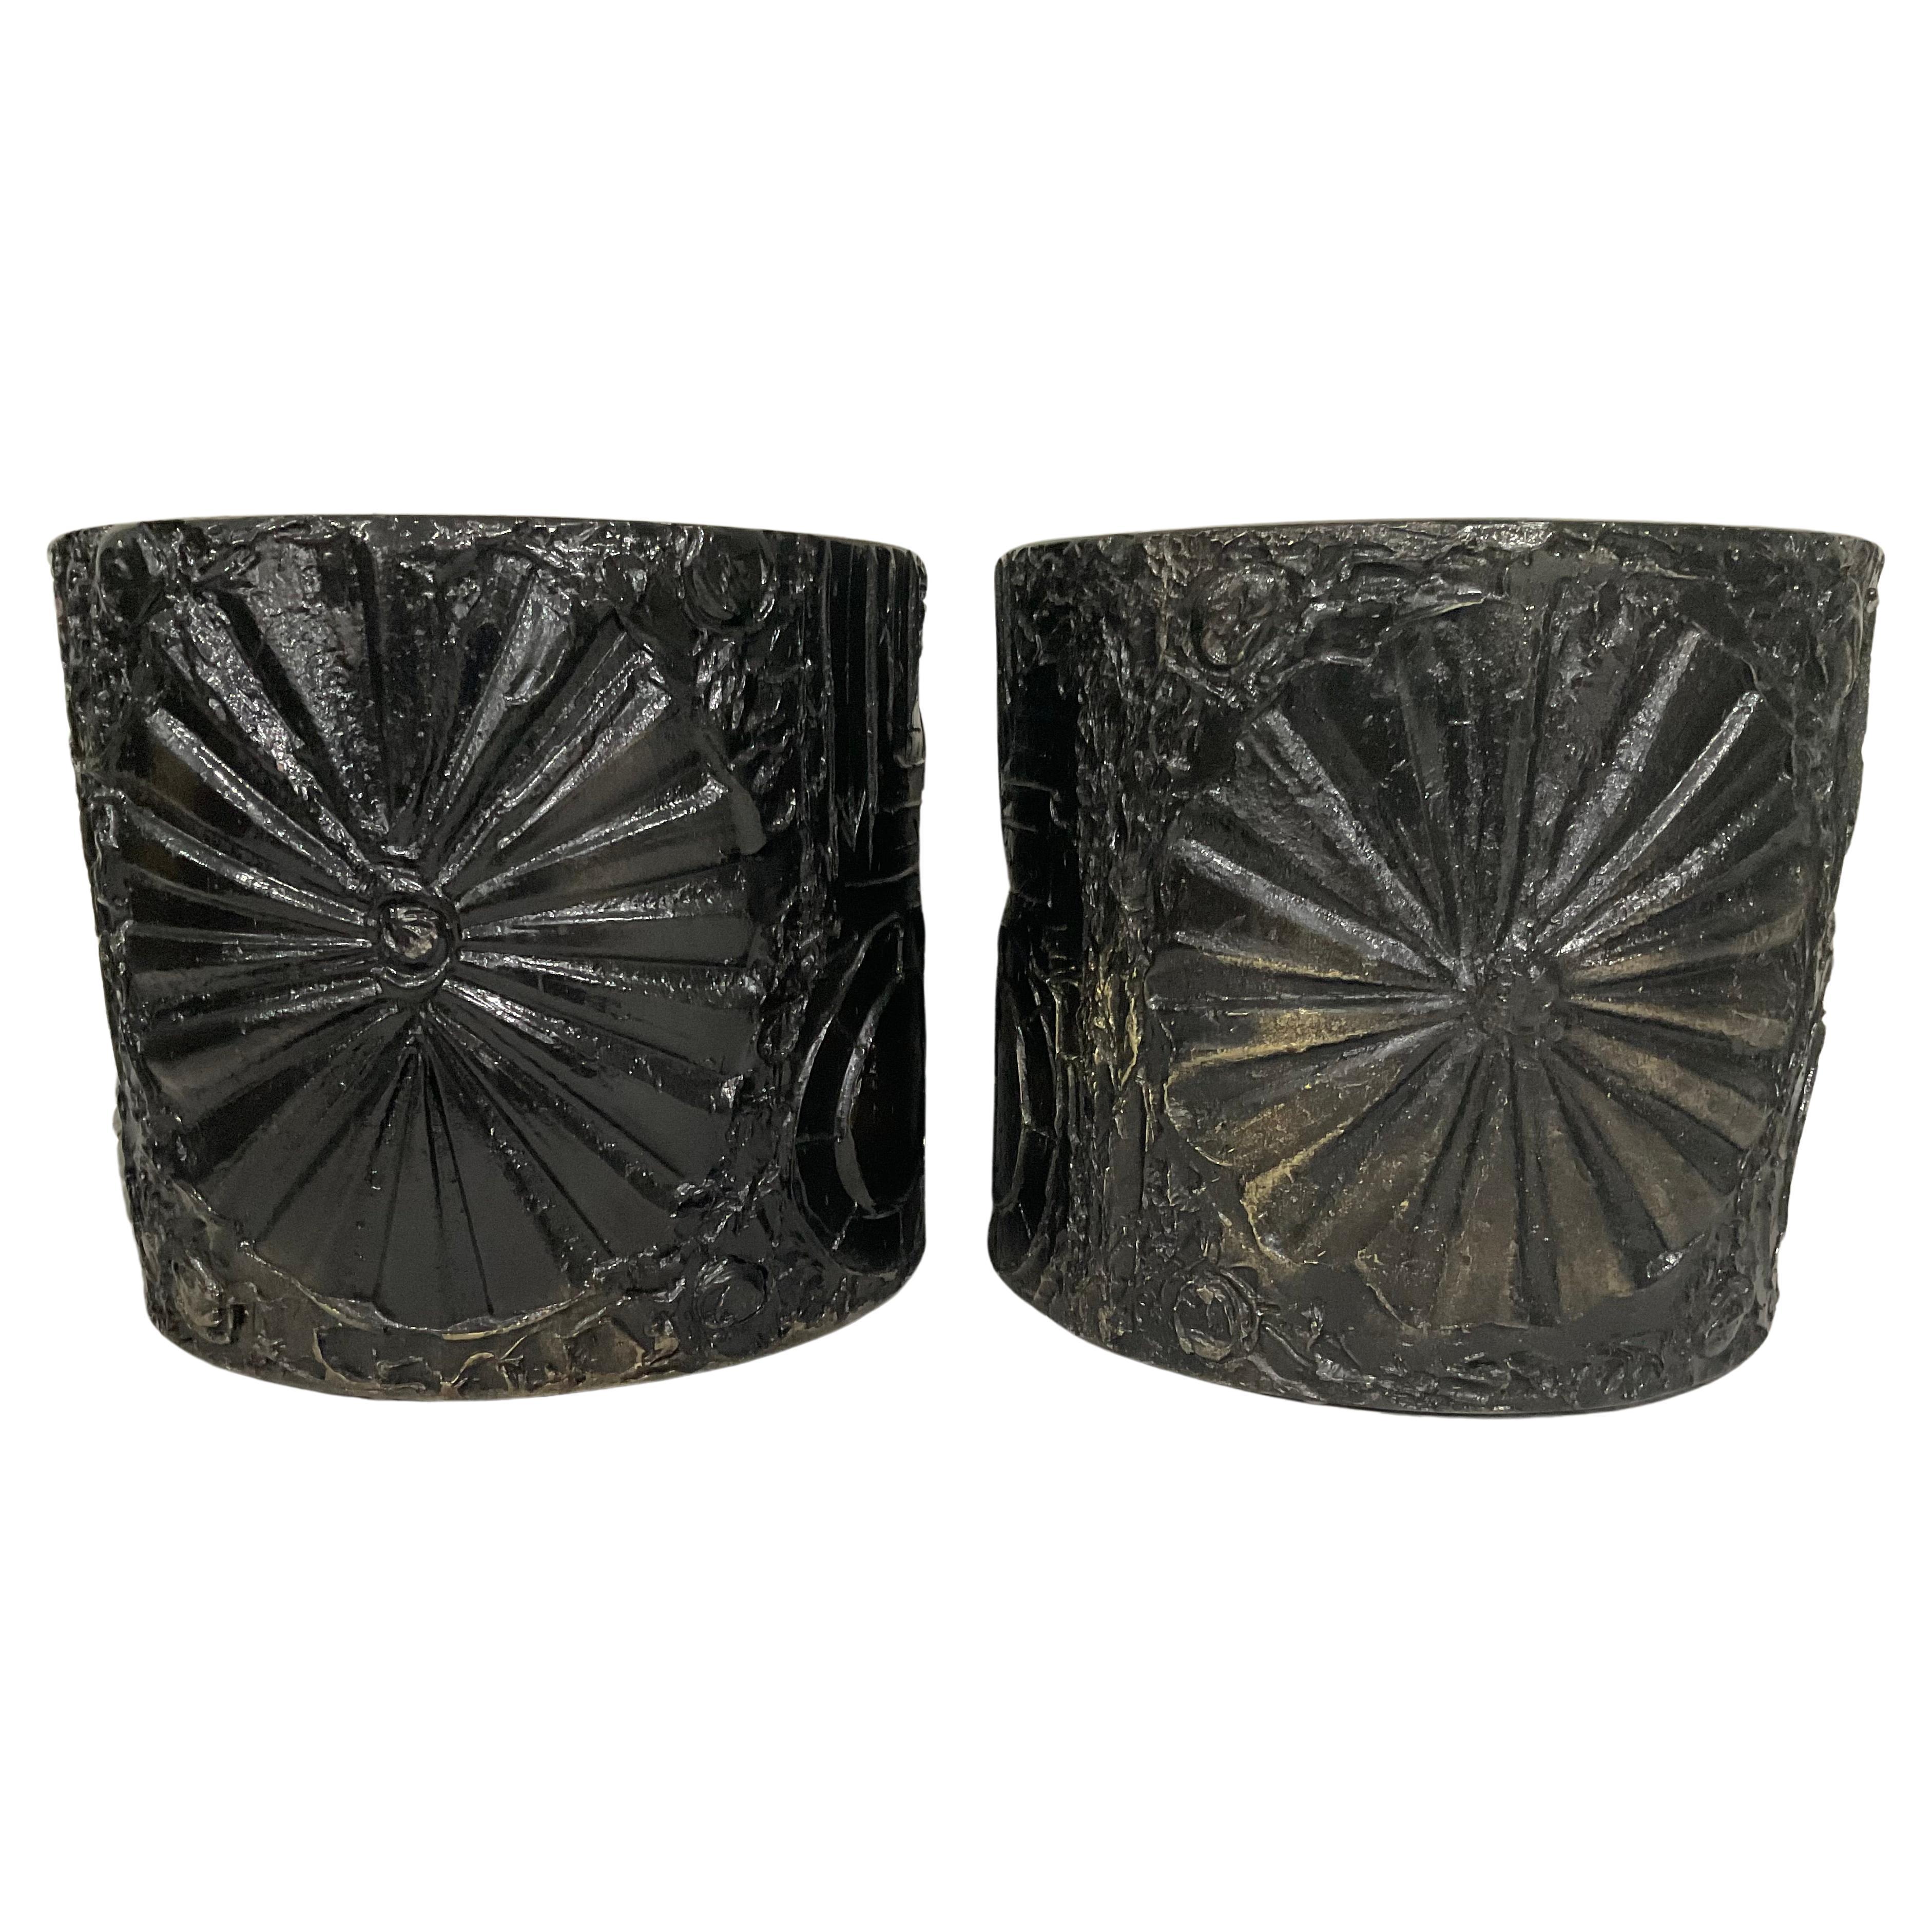 PAIR Adrian Pearsall Brutalist Drum End Tables with full circular decoration 